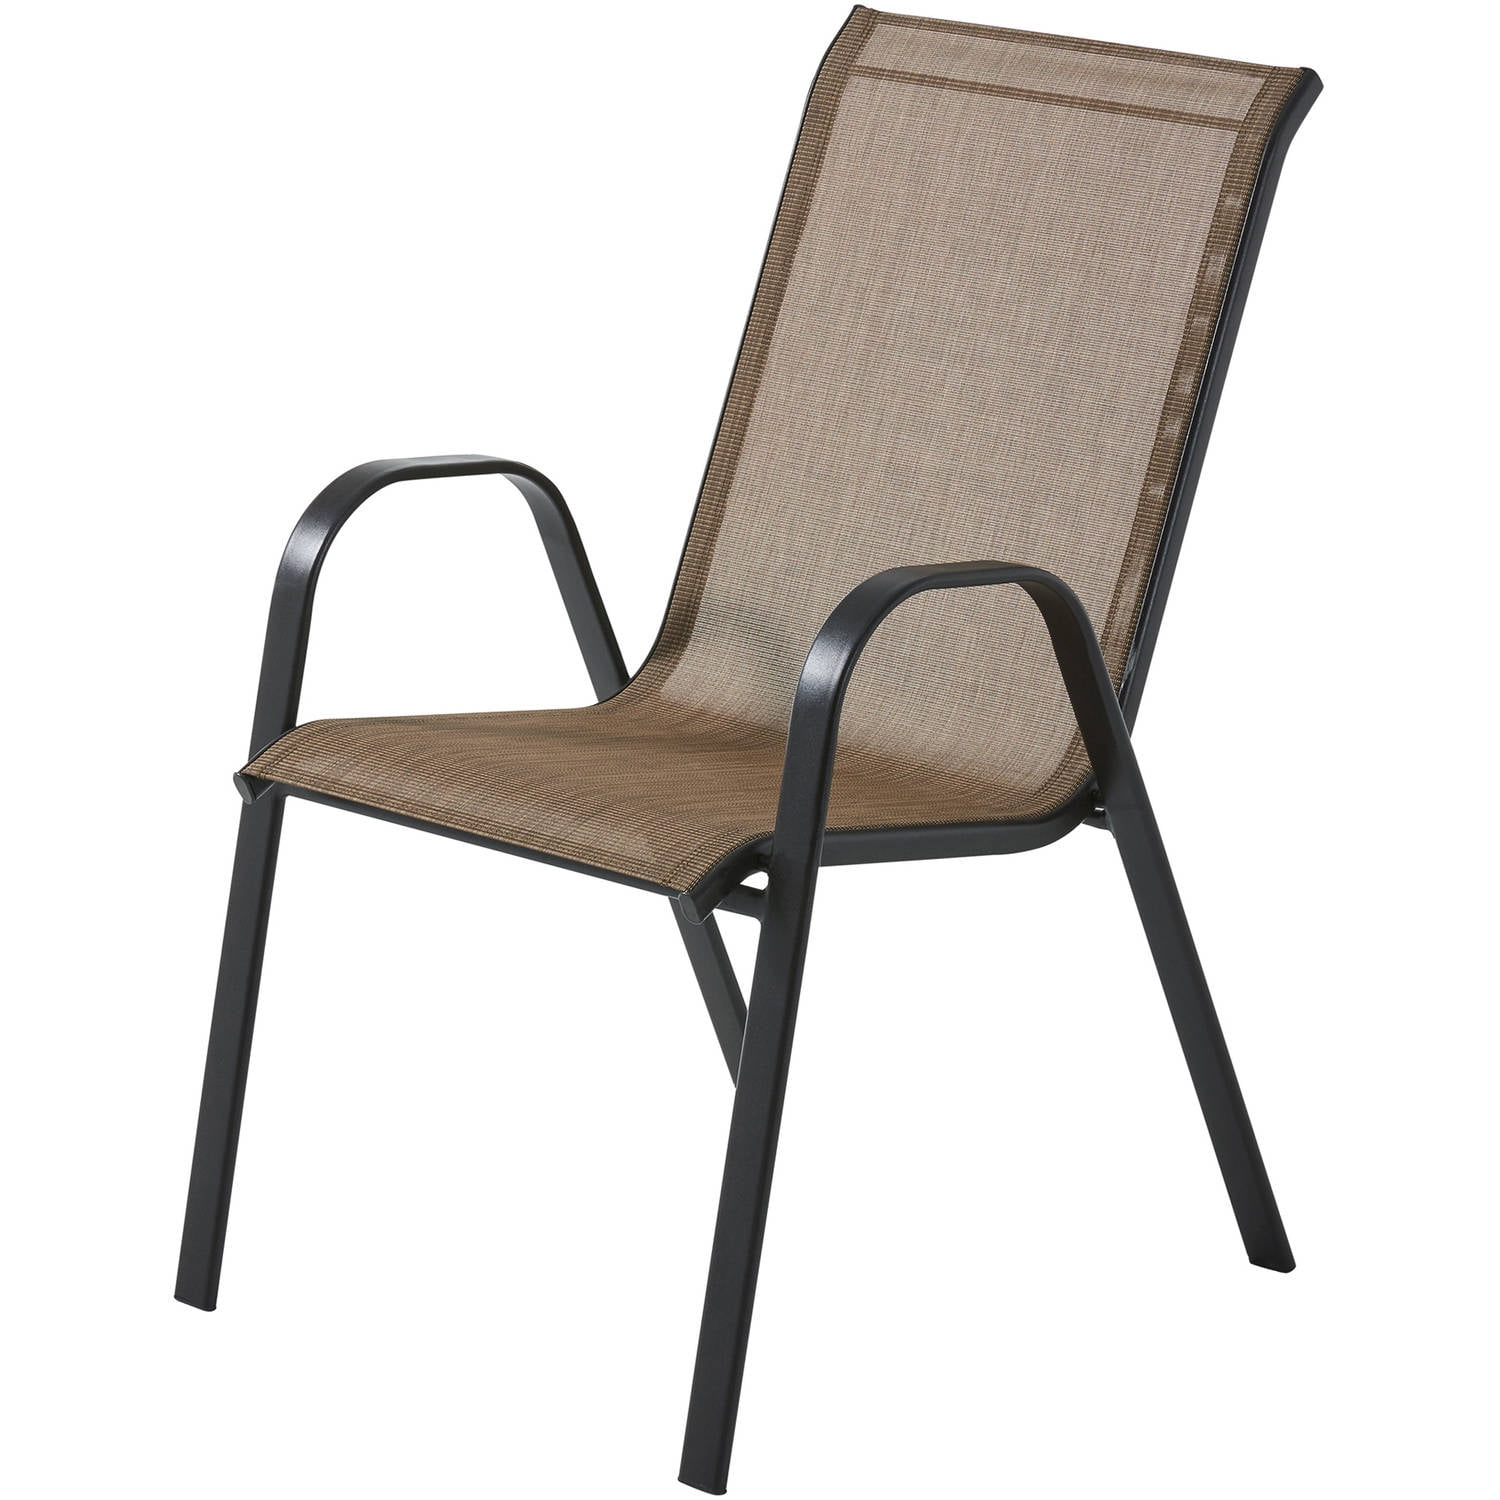 stackable patio chairs amazon